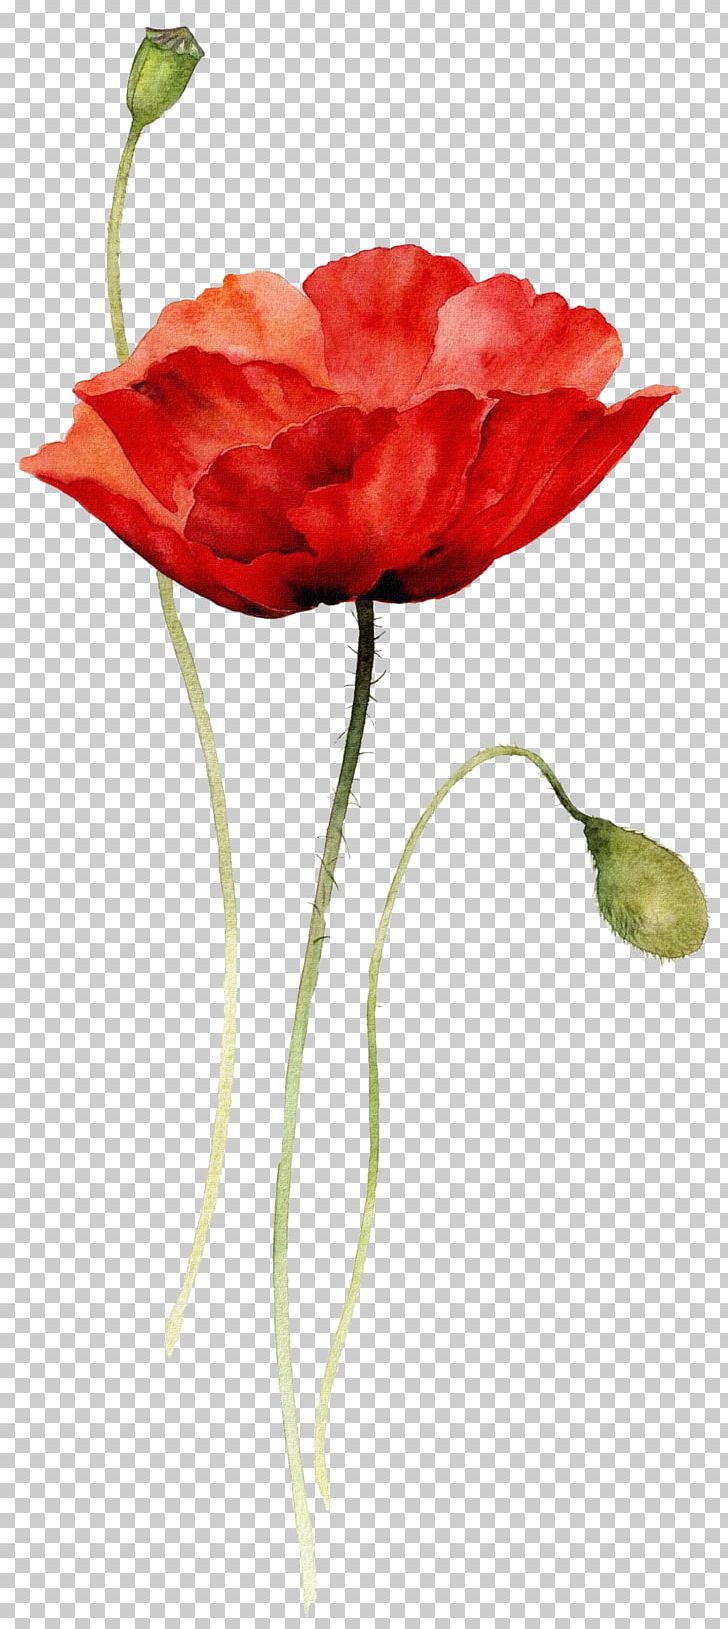 Watercolor Painting Drawing Flower Poppy PNG, Clipart, Carnation, Common Poppy, Coquelicot, Cut Flowers, Floral Design Free PNG Download